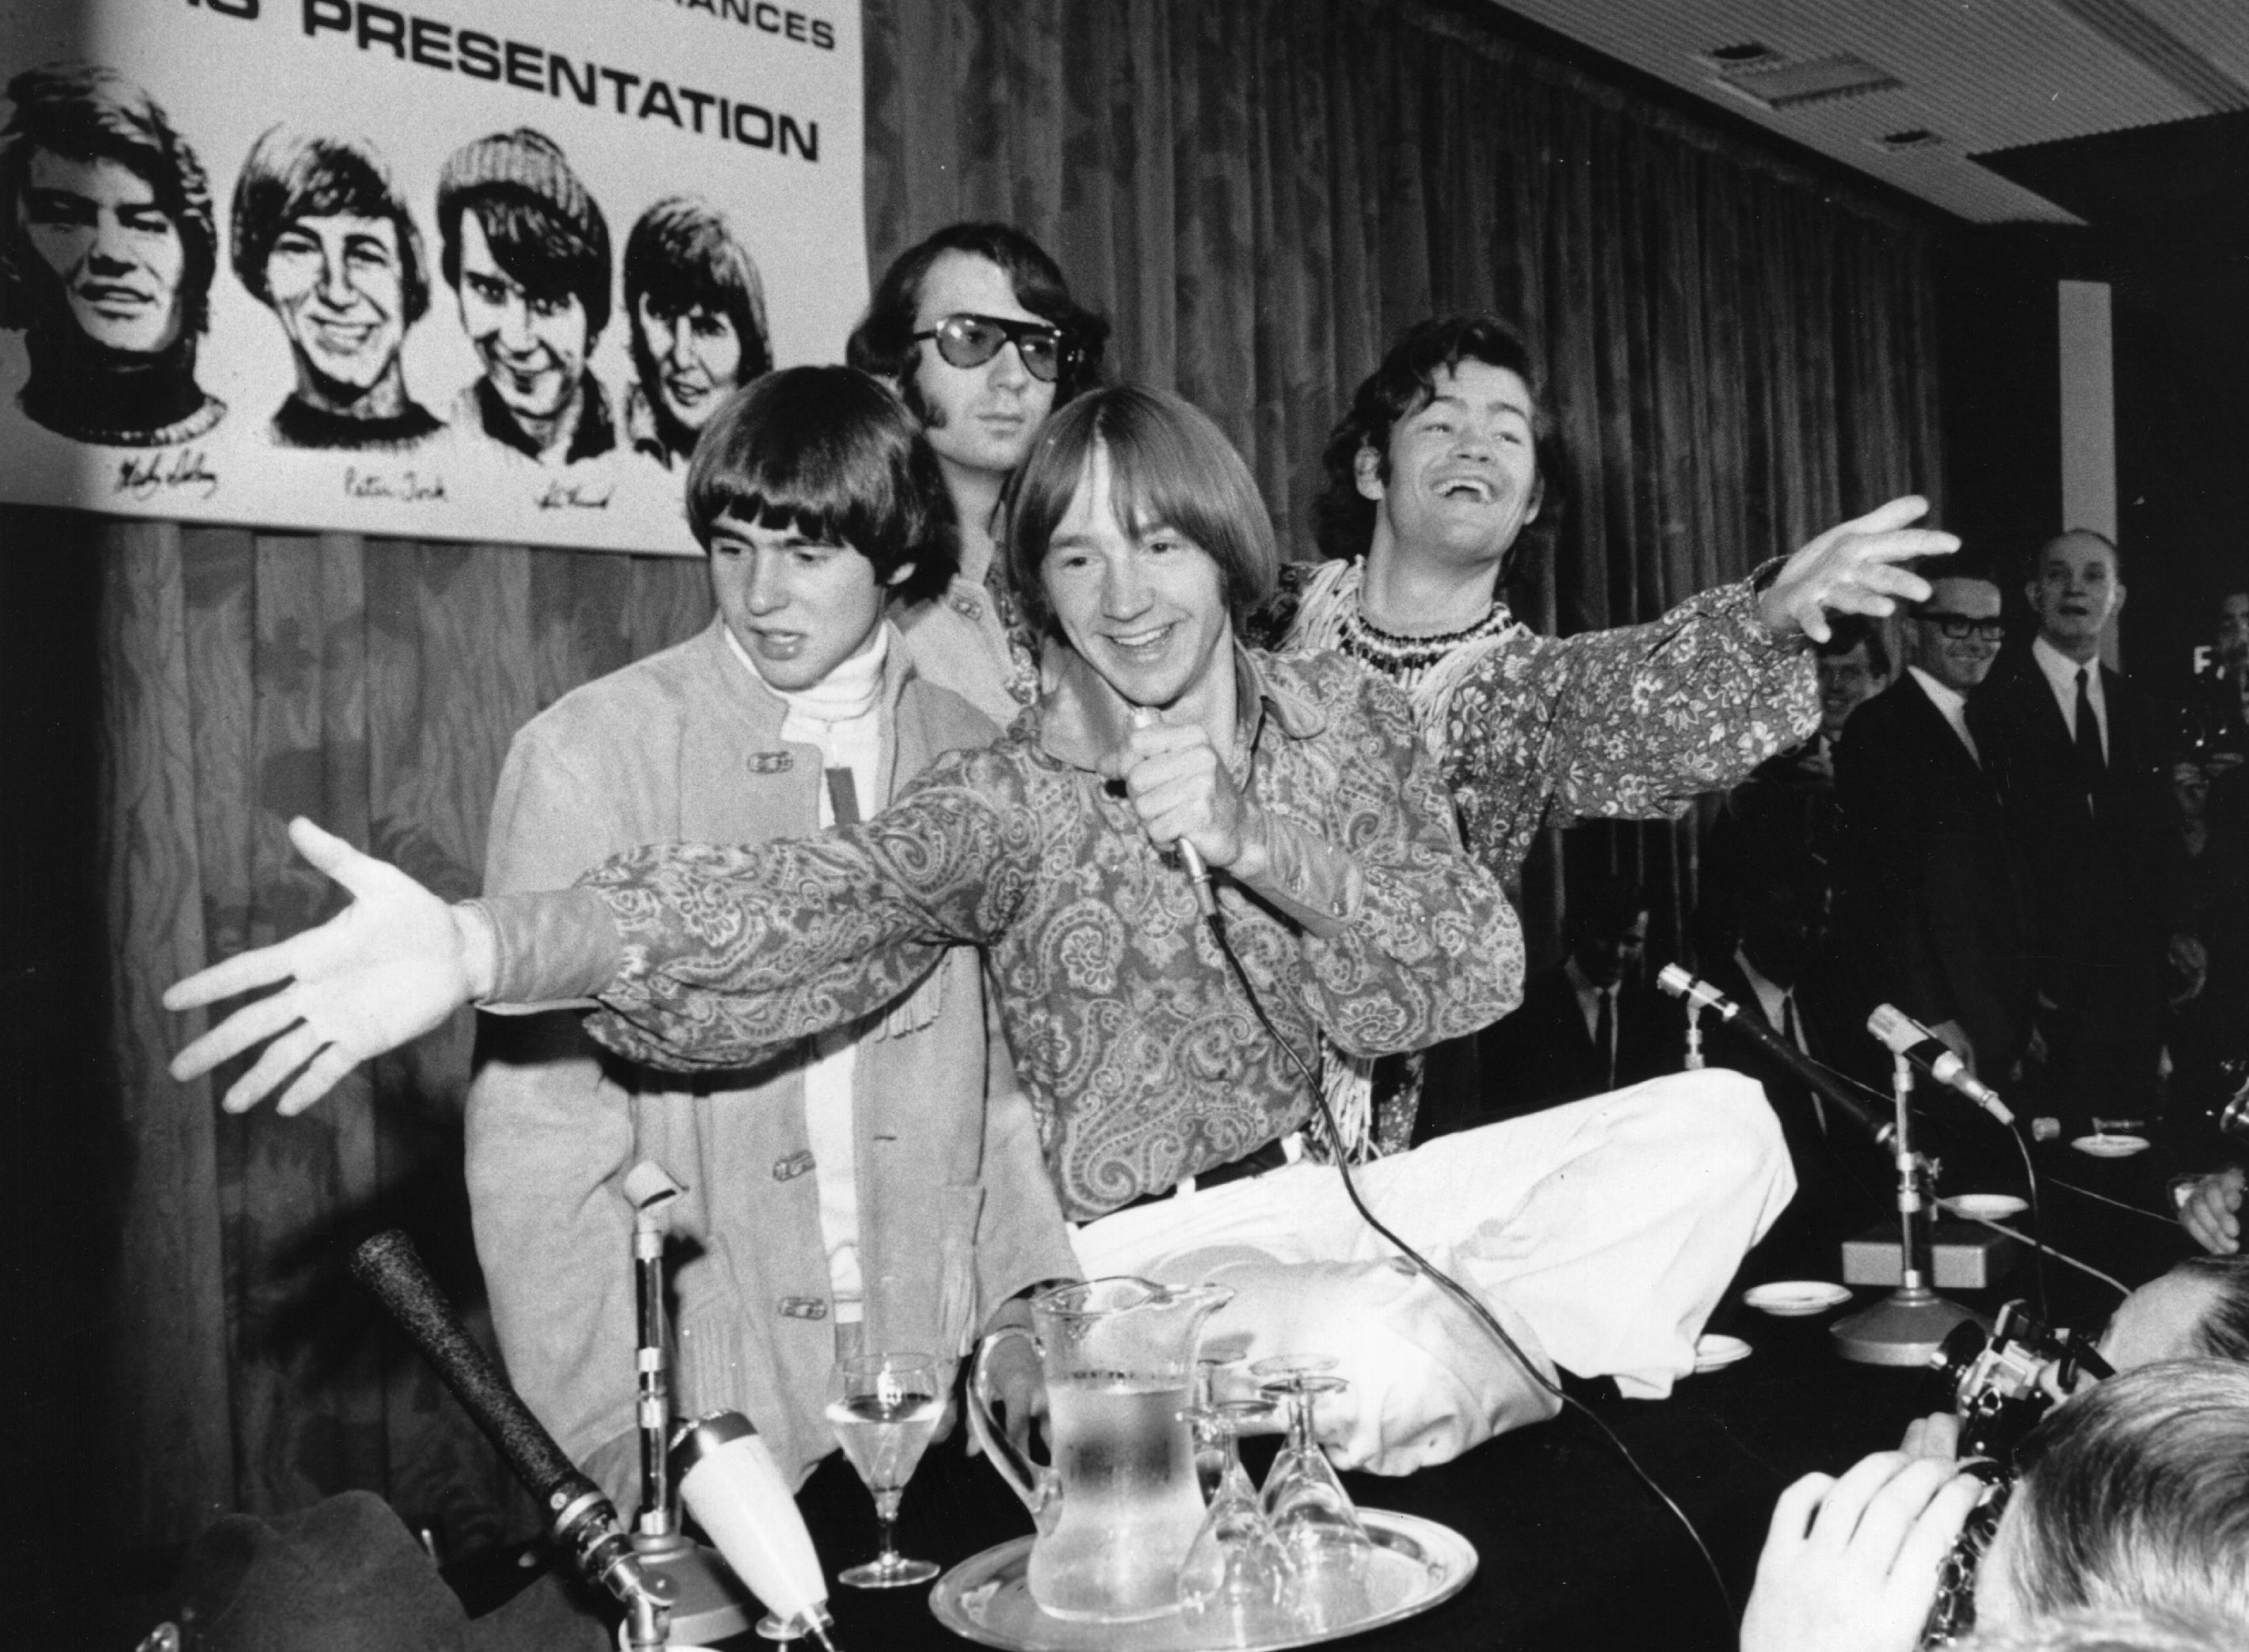 The Monkees’ Davy Jones, Mike Nesmith, Peter Tork, and Micky Dolenz near a poster